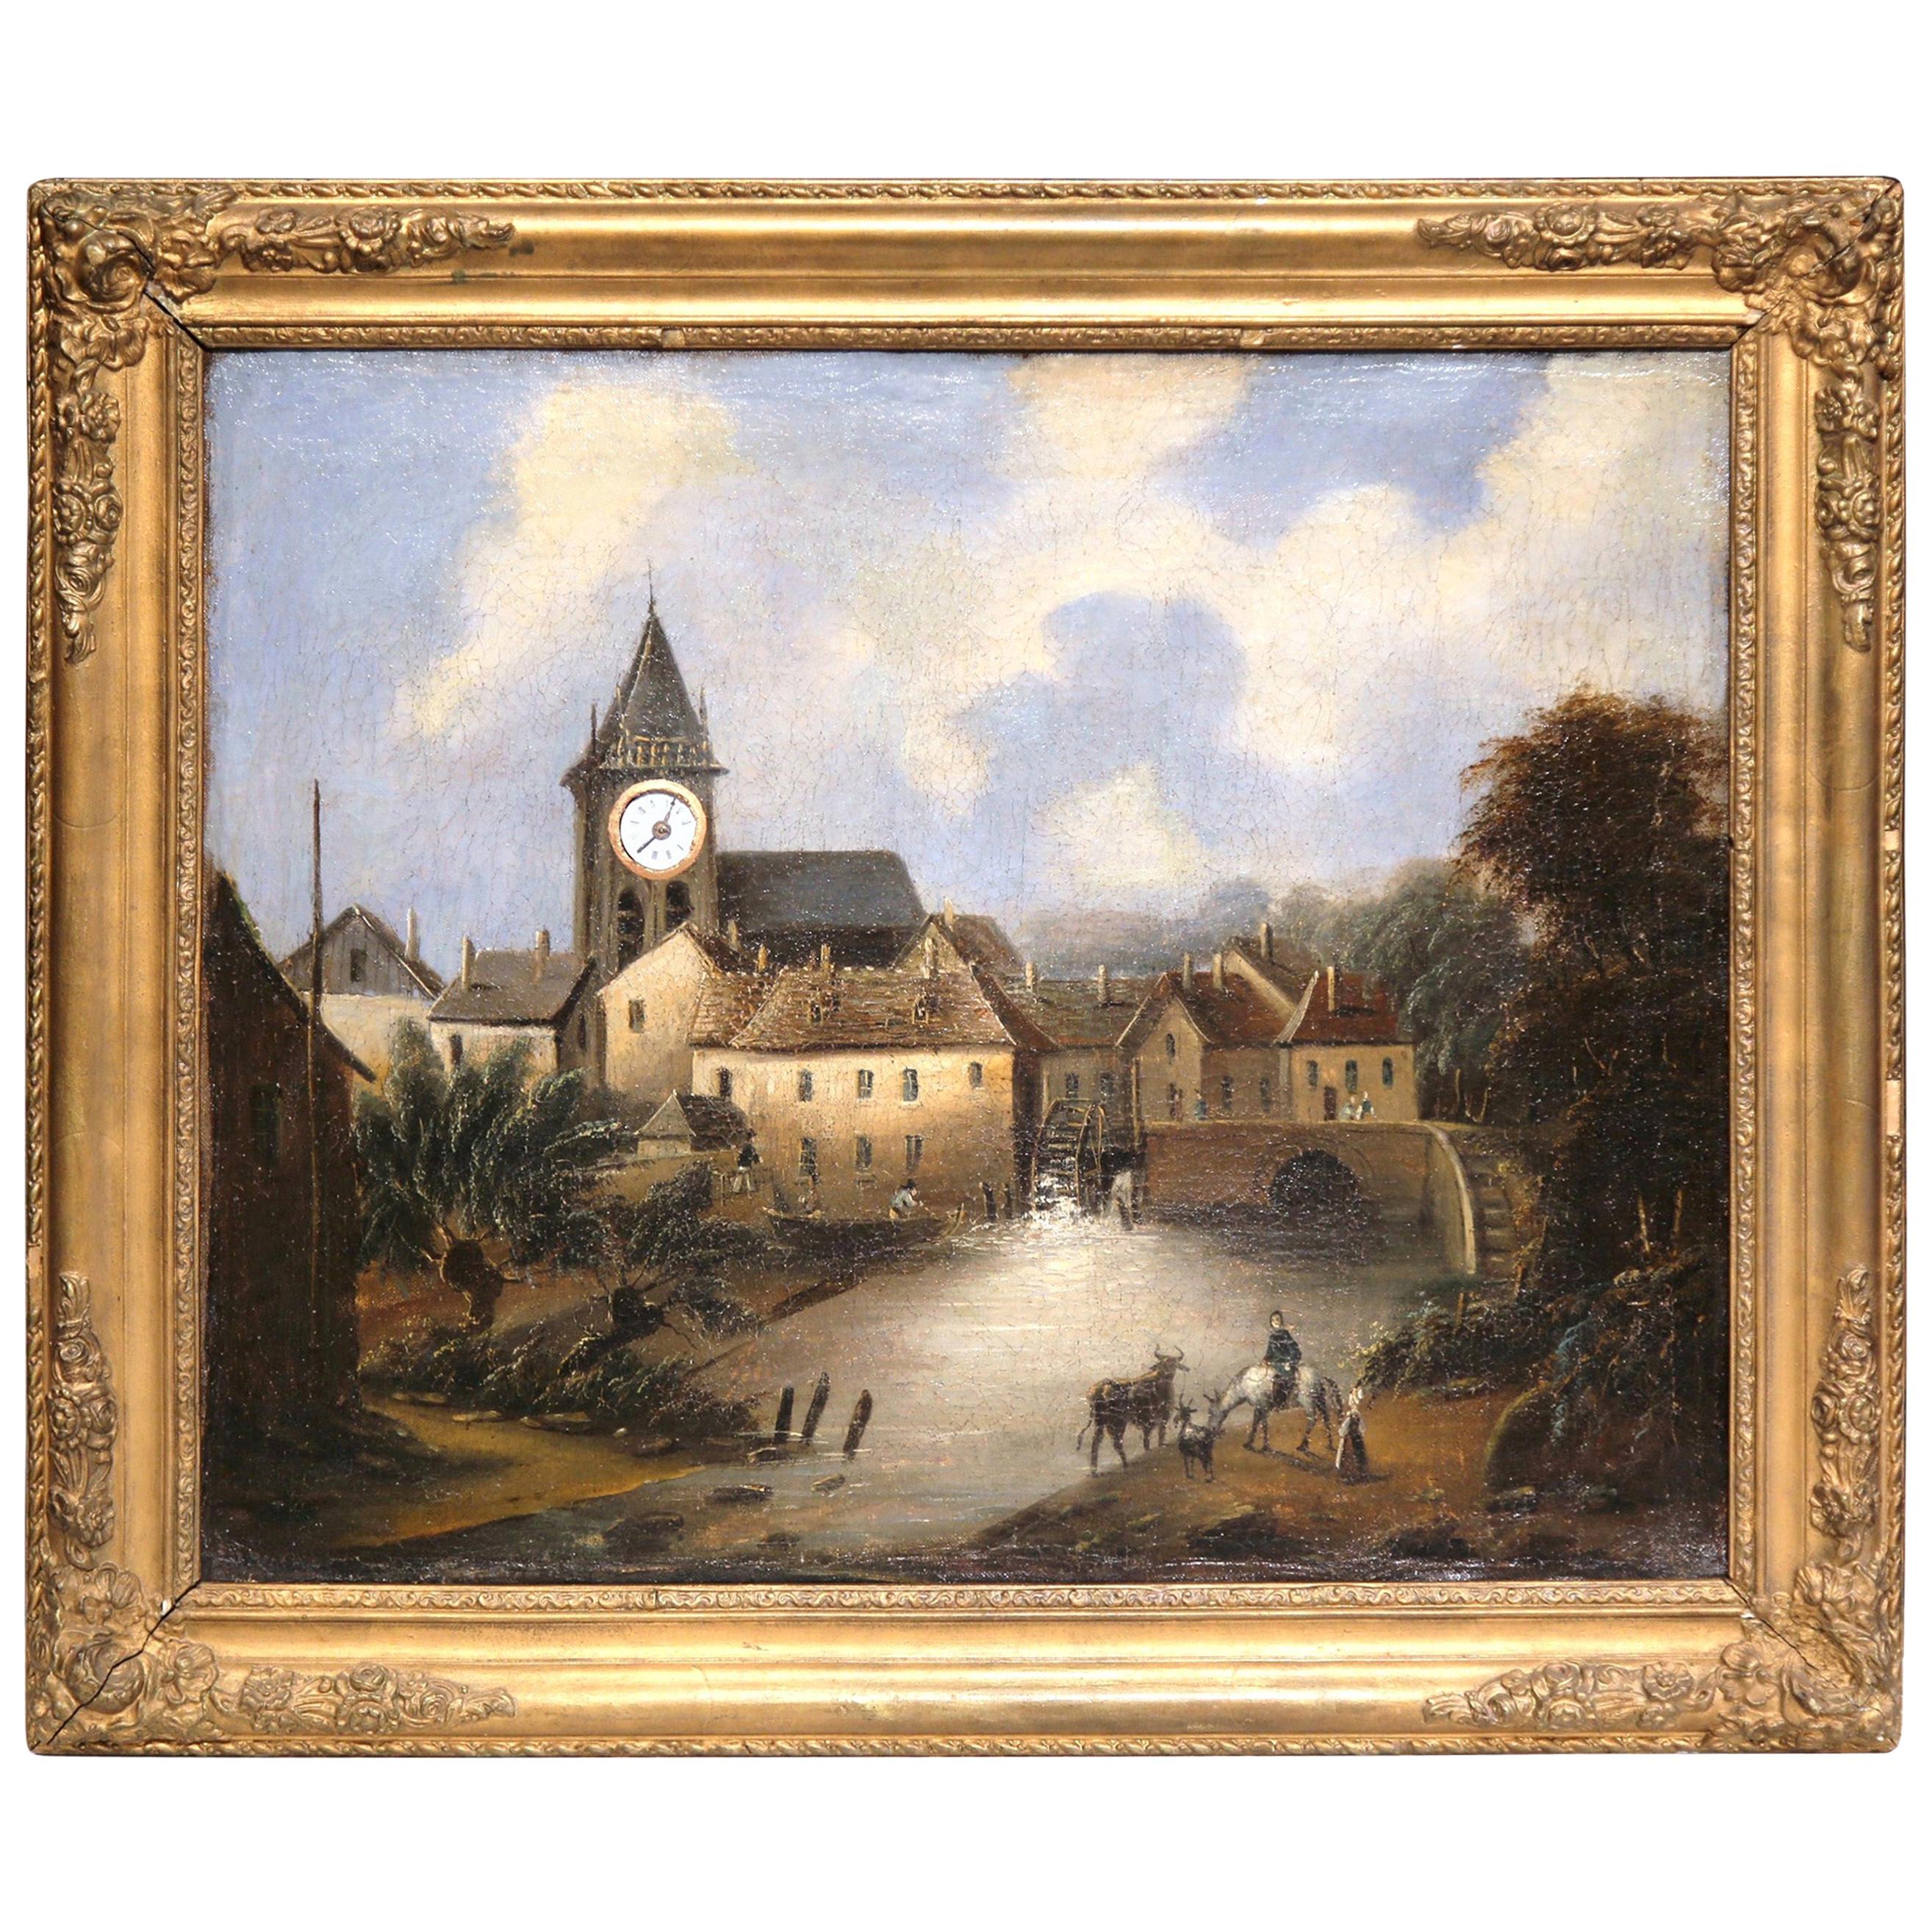 18th Century French Oil on Canvas "Clock Painting" in Carved Gilt Frame